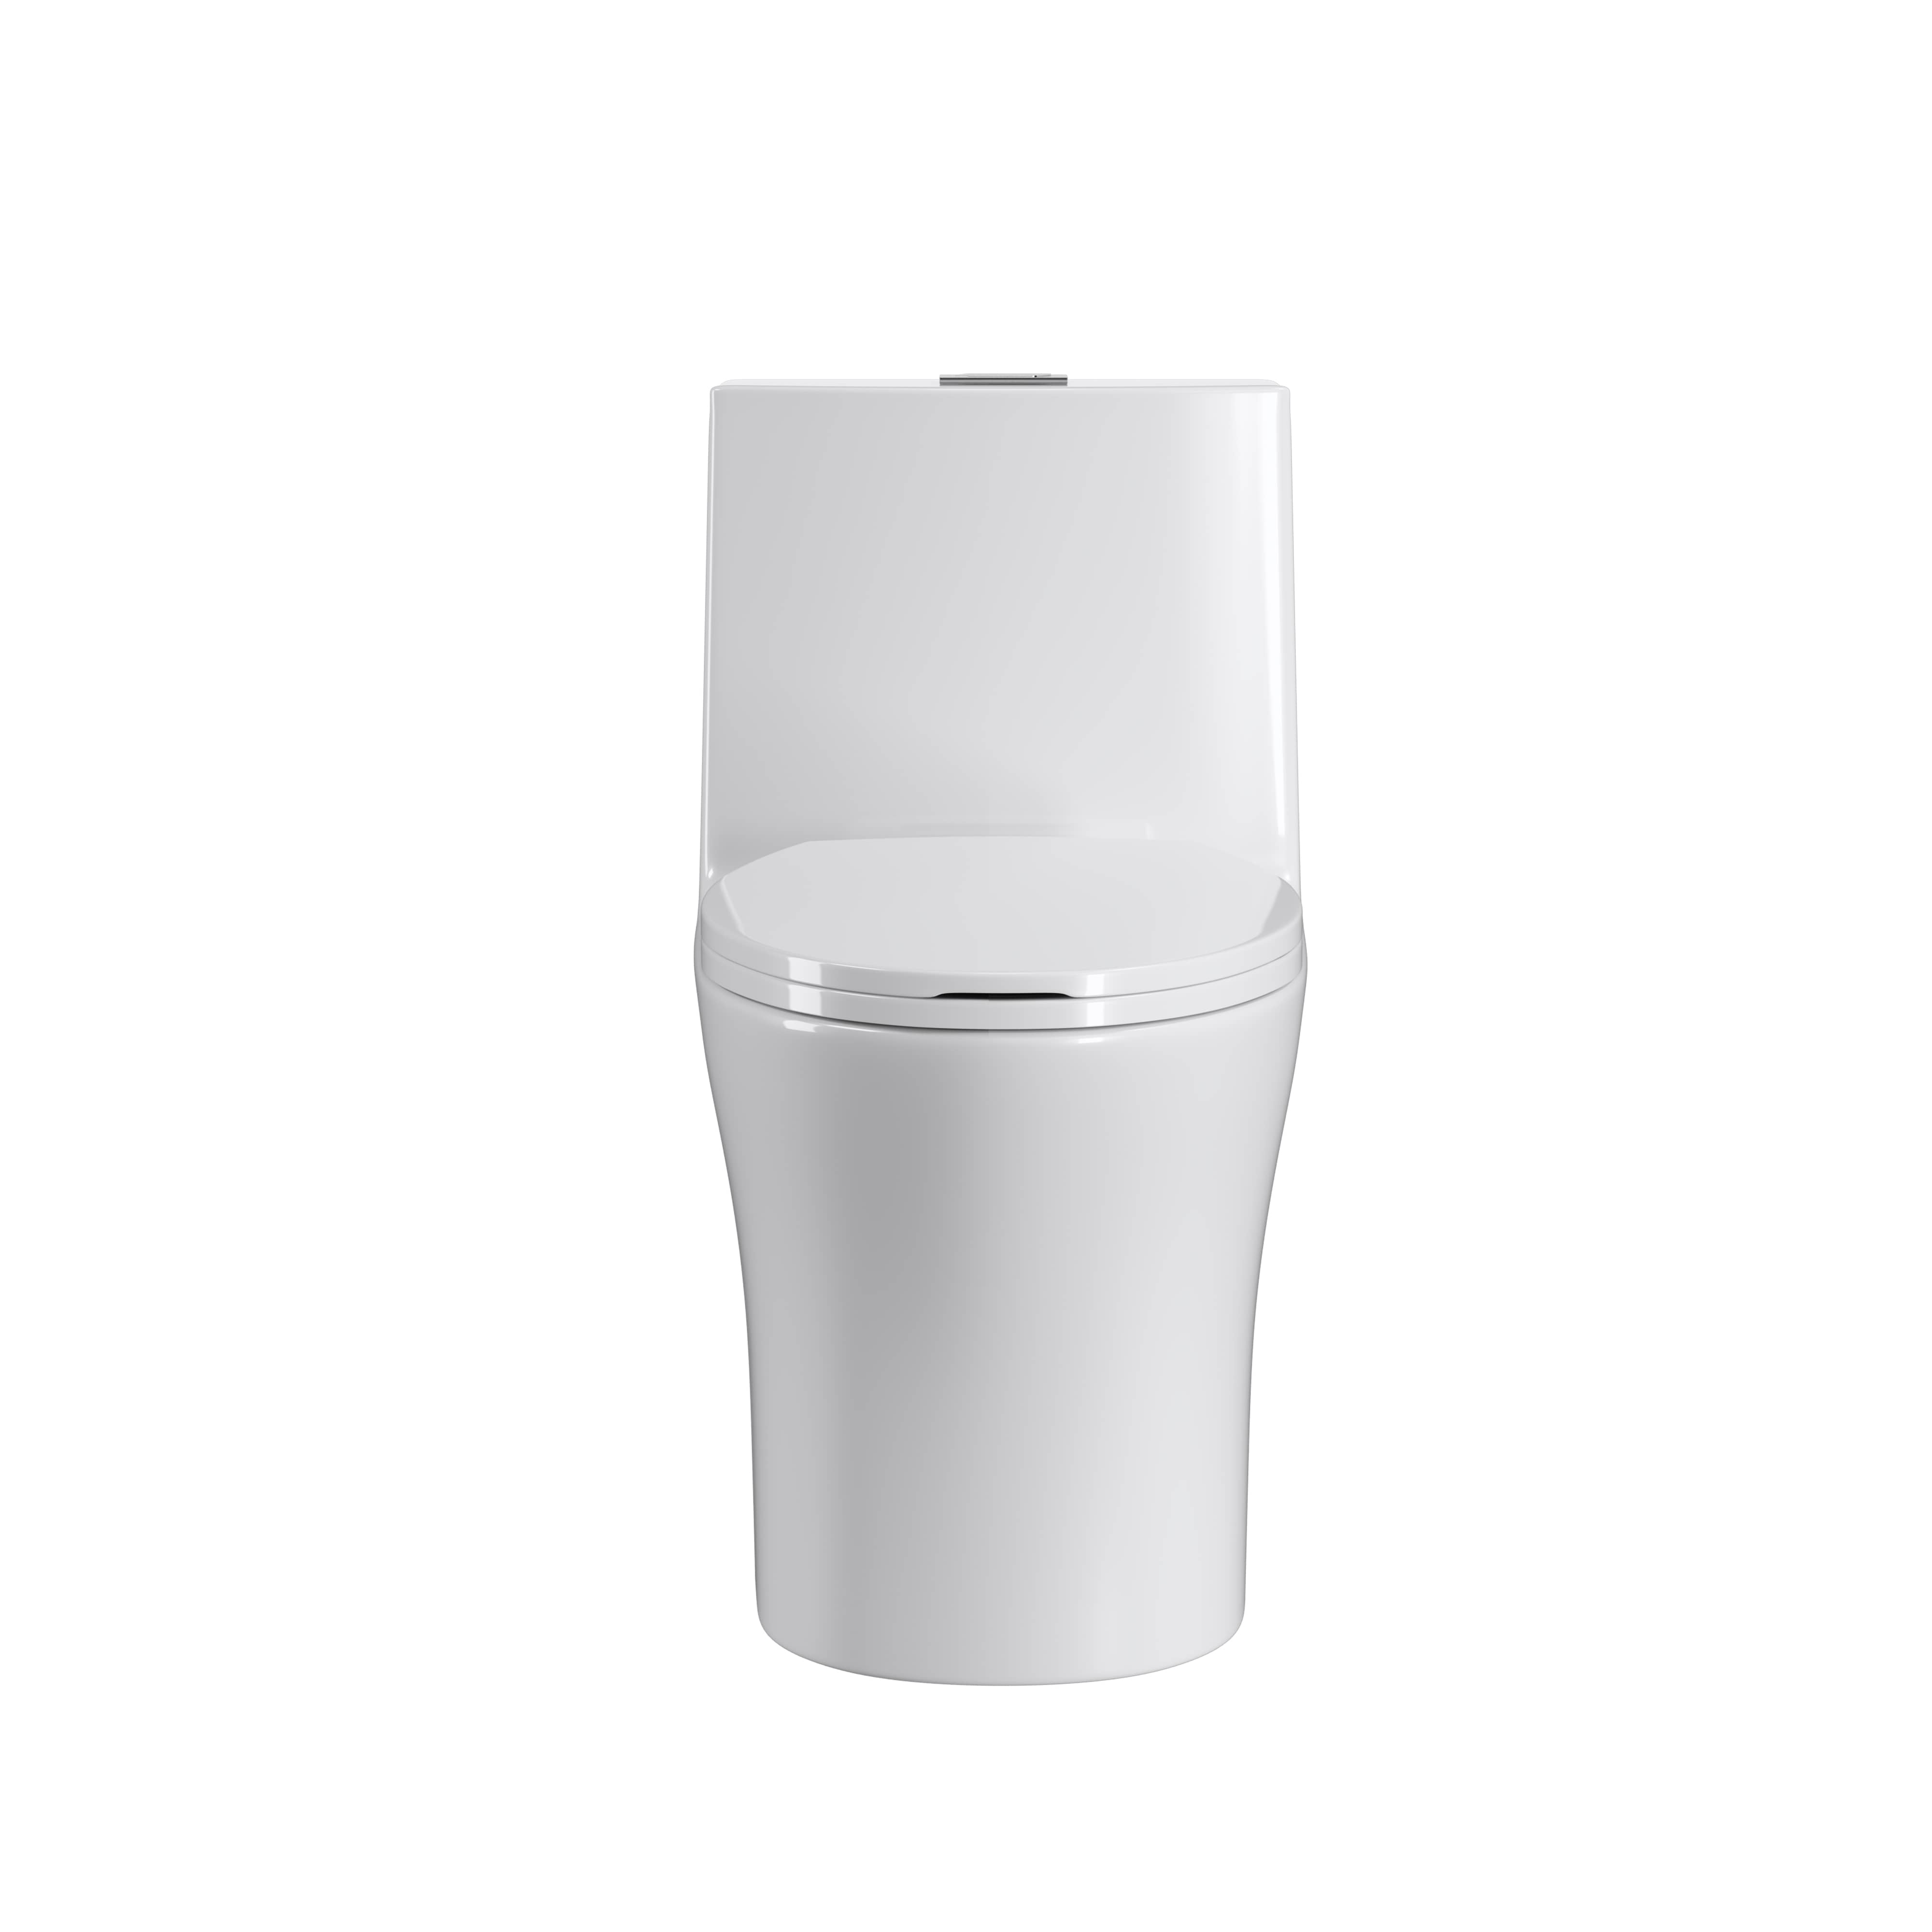 Dual Flush Elongated Standard One Piece Toilet with Soft Close Seat Cover, High-Efficiency Supply, and White Finish Toilet Bowl 